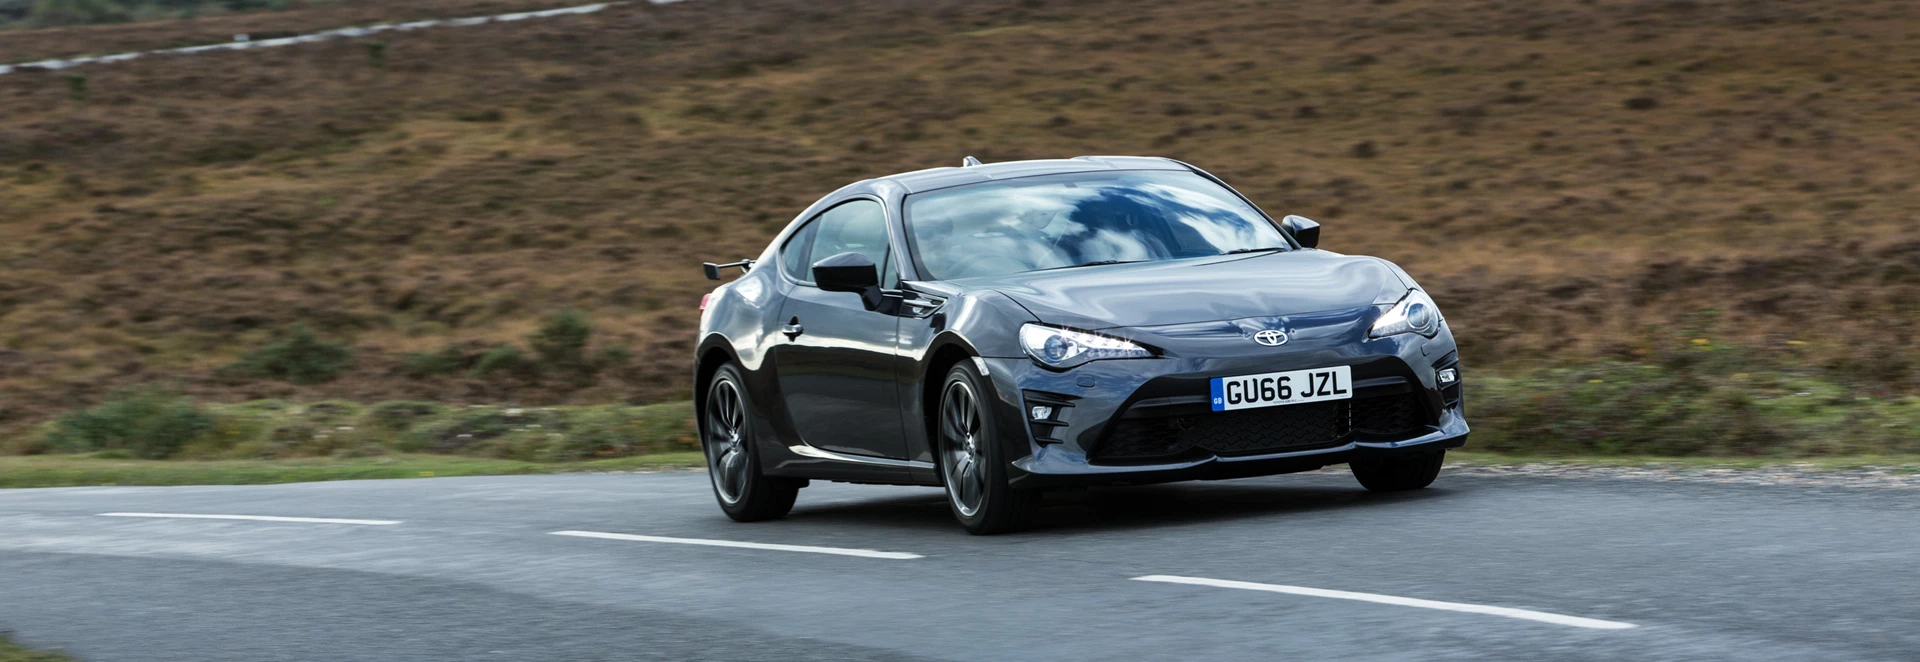 Toyota GT86 2.0-litre Coupe Review 